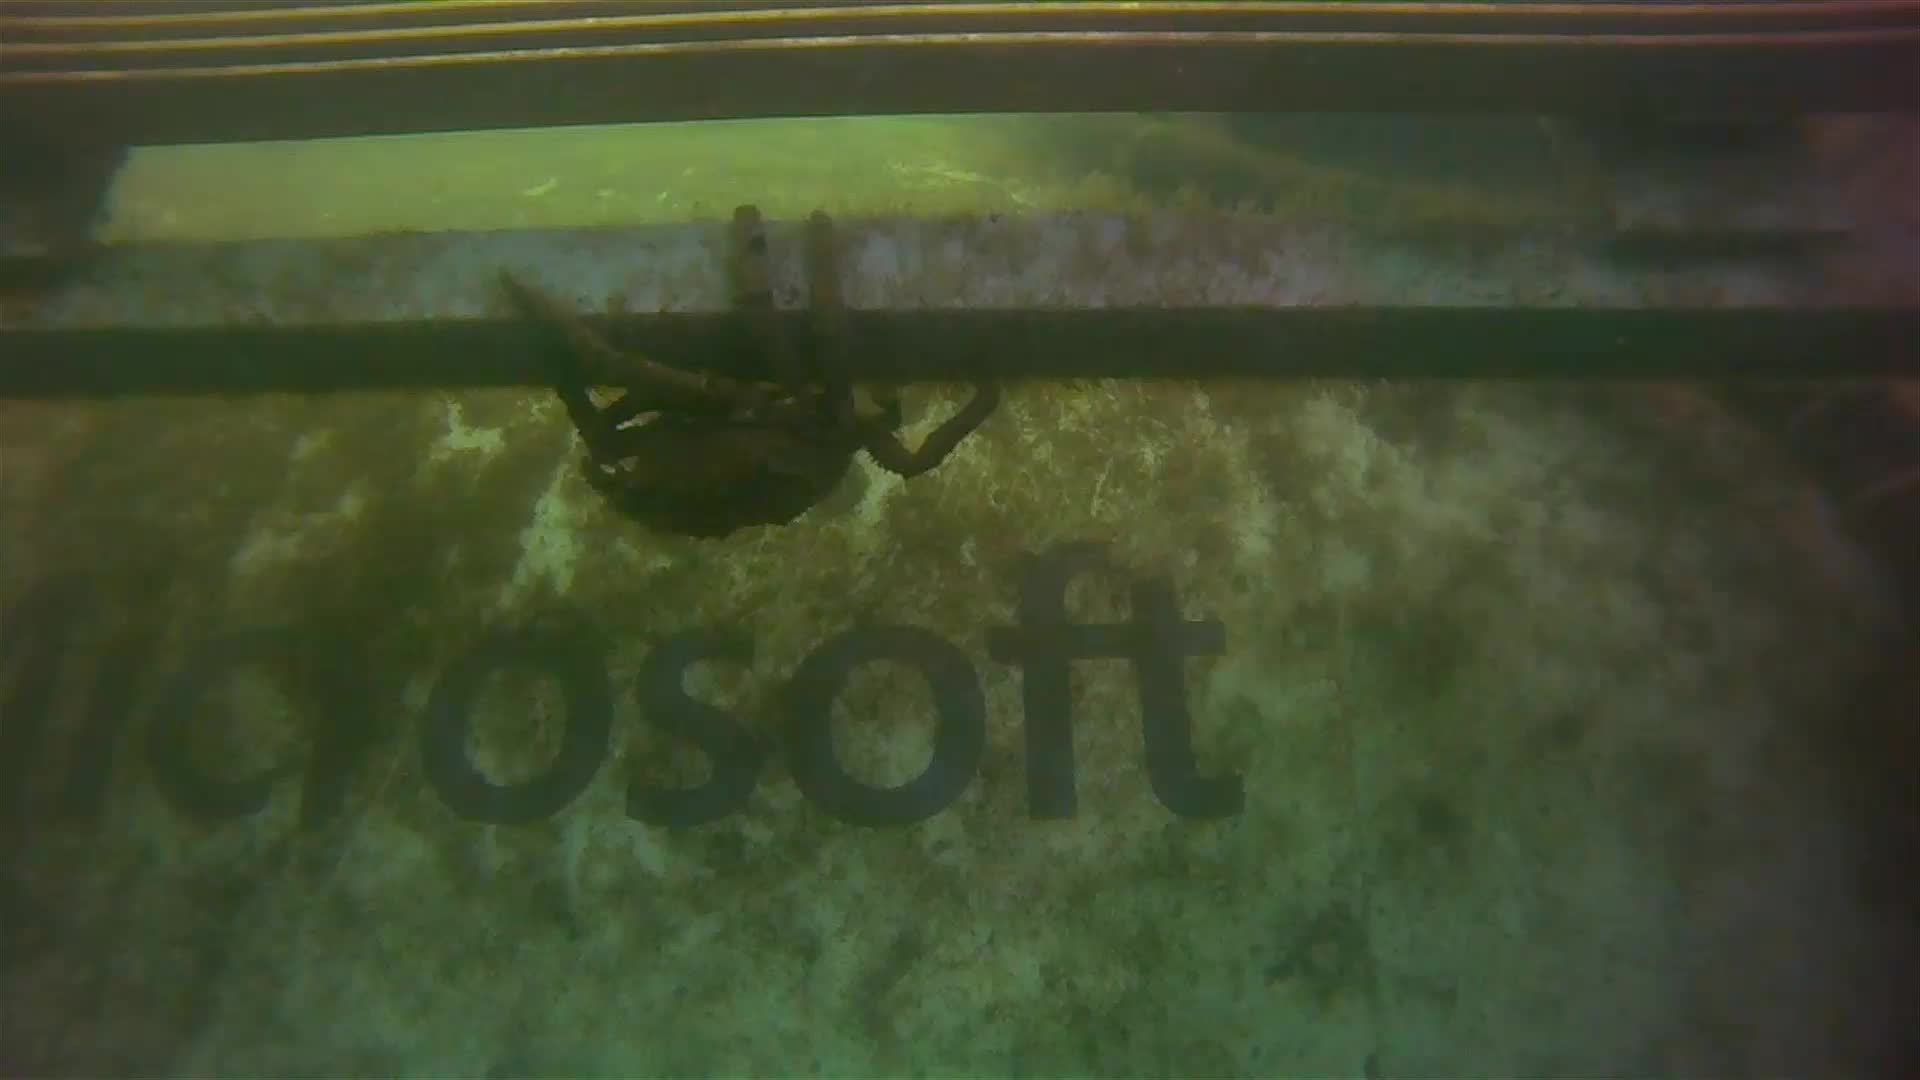 A crab crawls along the Leona Philpot, with the Microsoft logo in the background